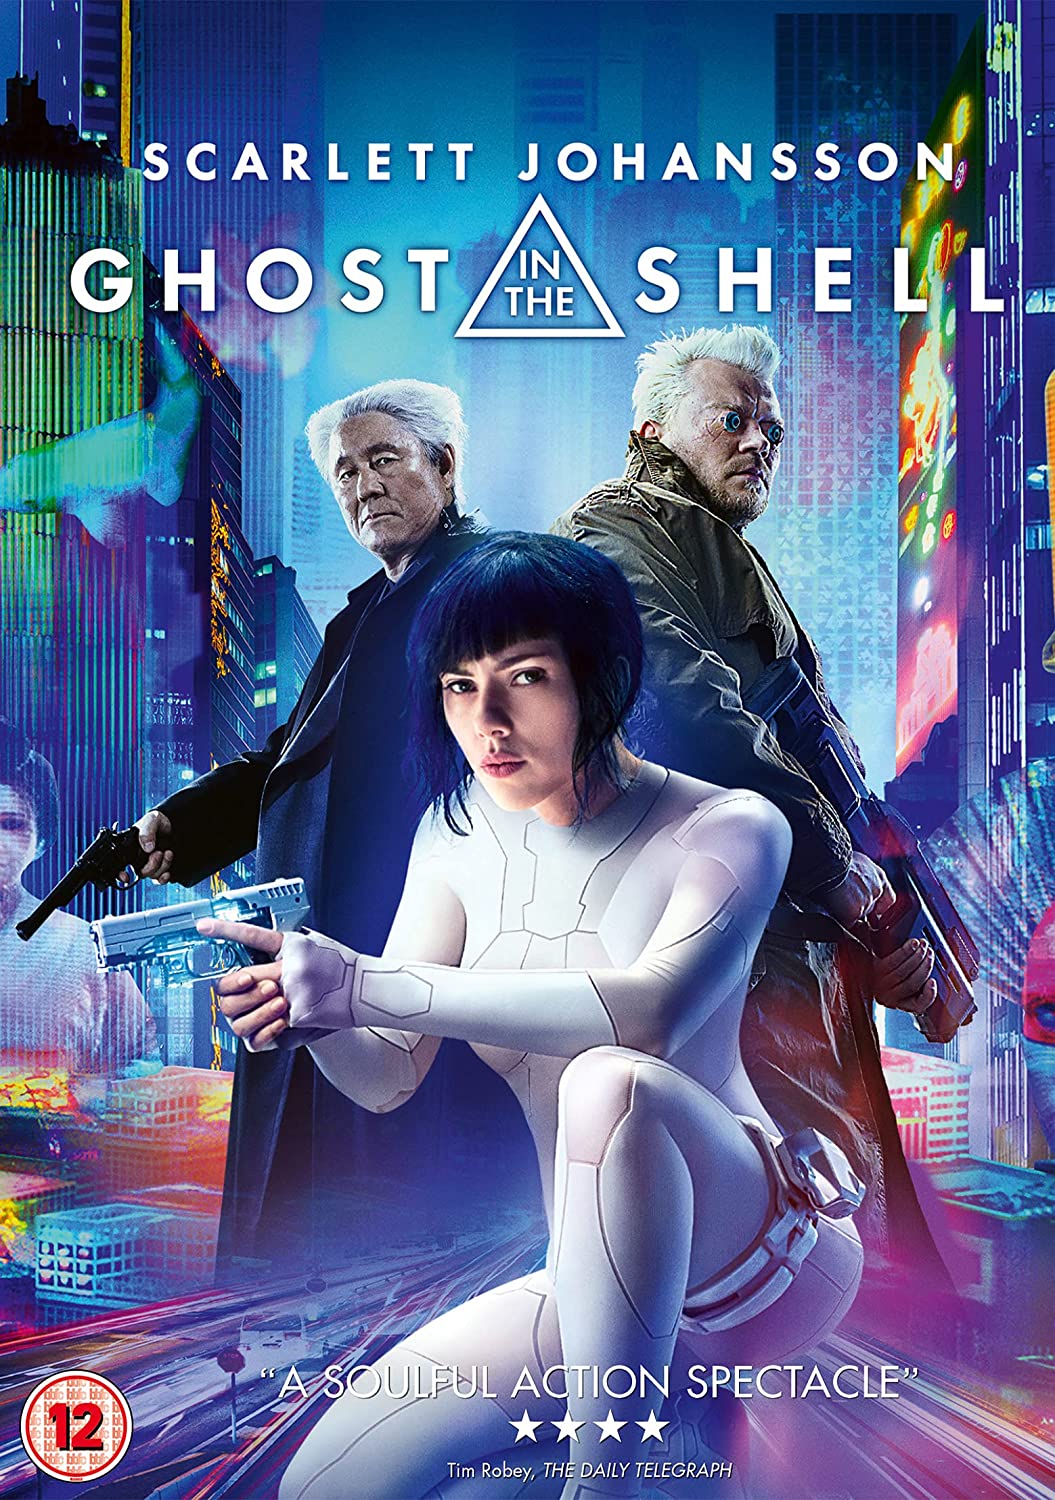 Ghost In The Sheel [DVD] [2017]